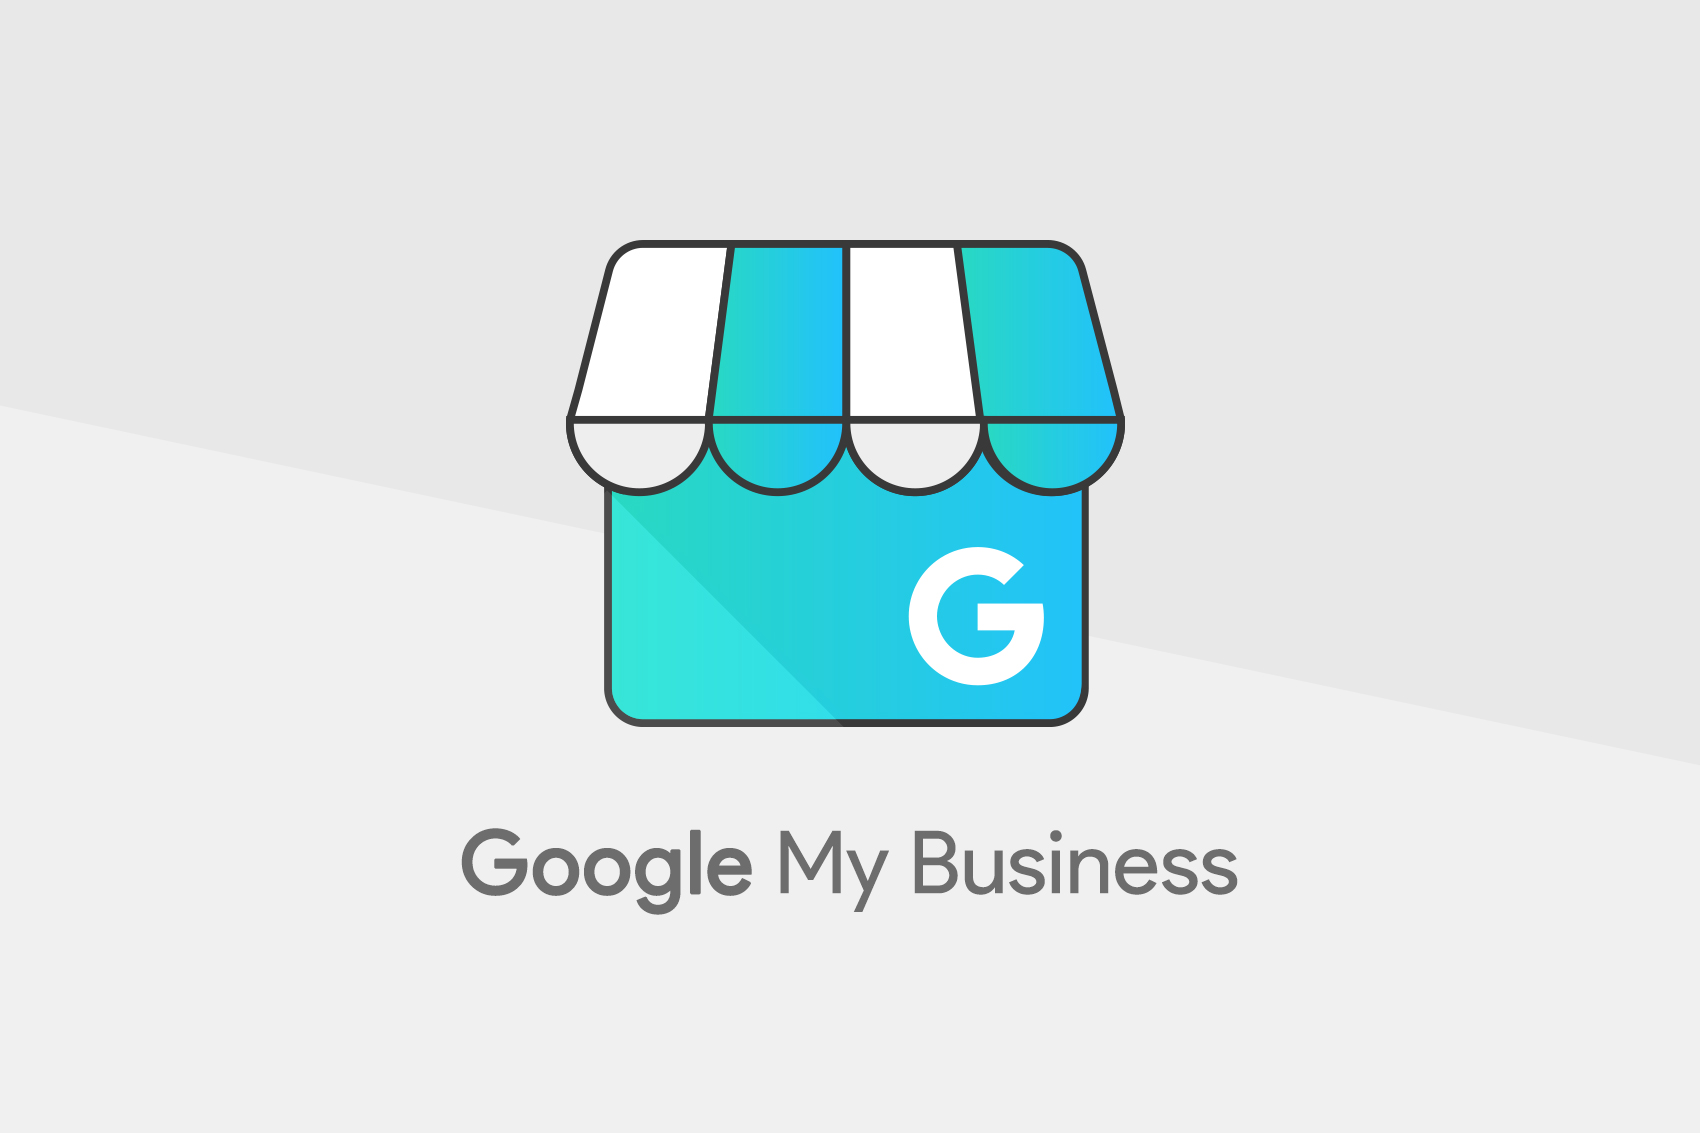 Google my business logo on a white background.